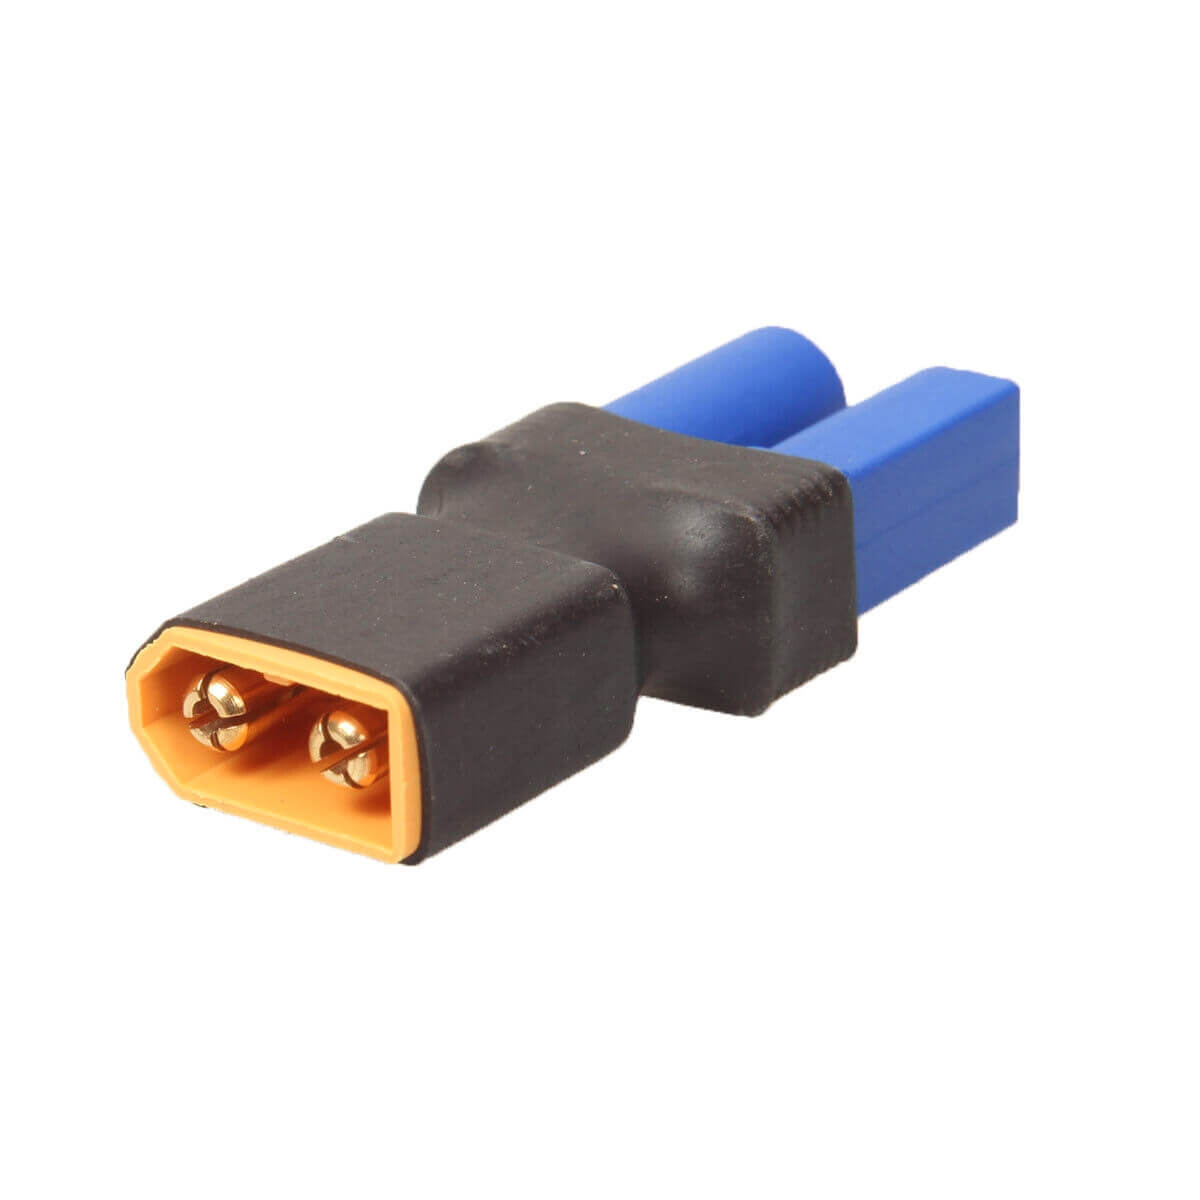 EC5 Female Connector to XT60 Male Plug Adapter